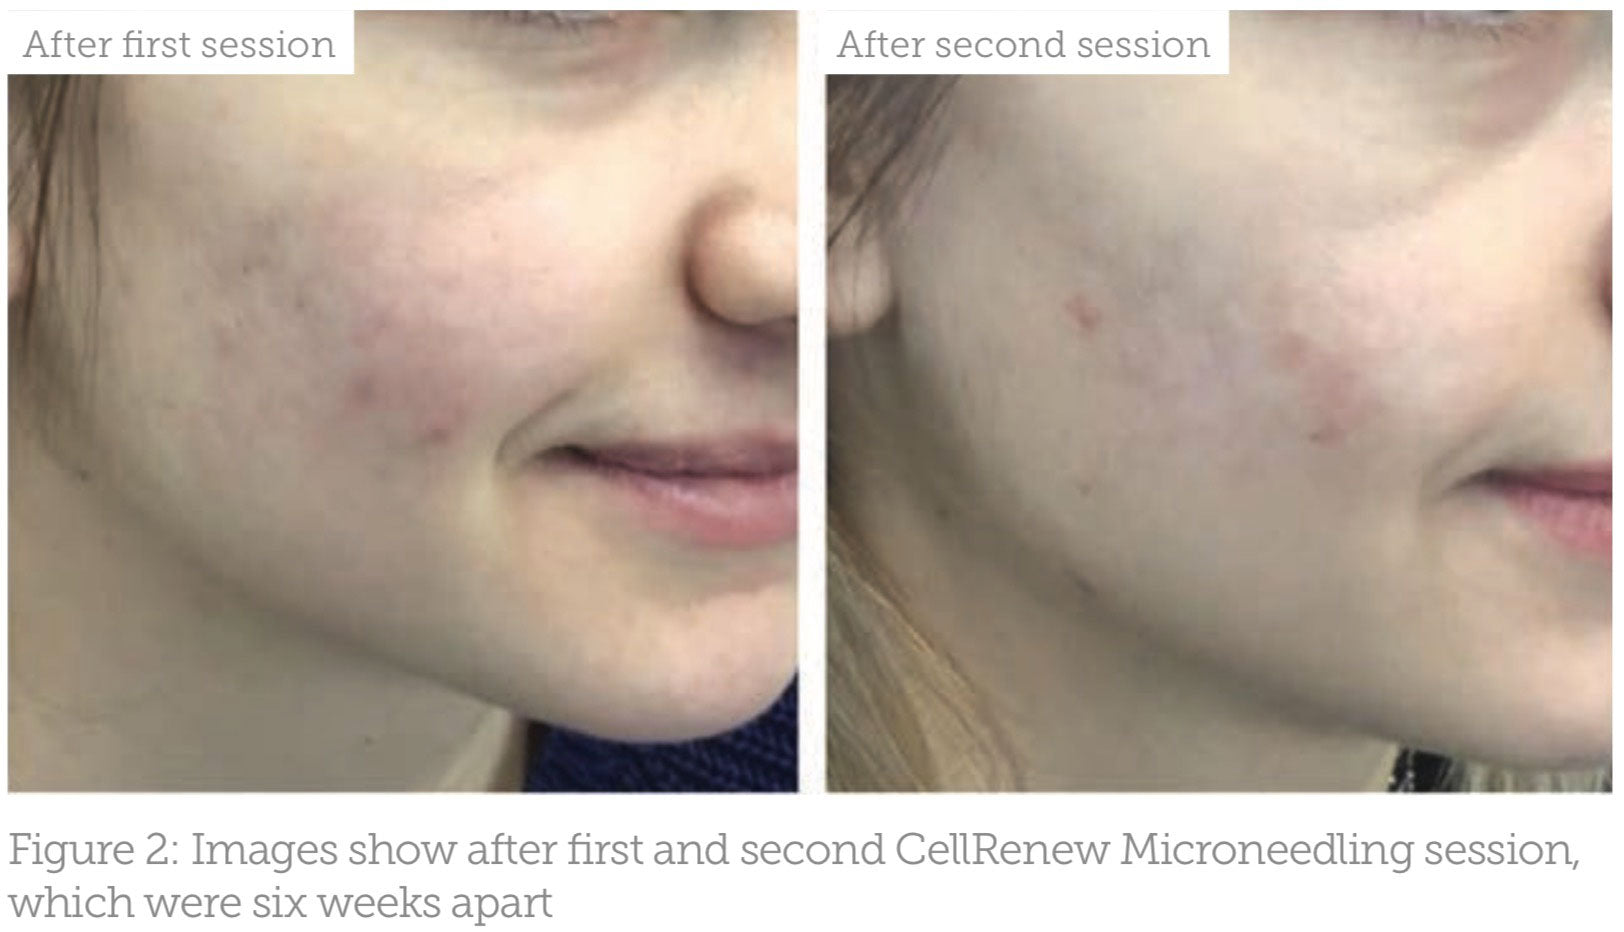 Images show after first and second CellRenew Microneedling session, which were 6 weeks apart